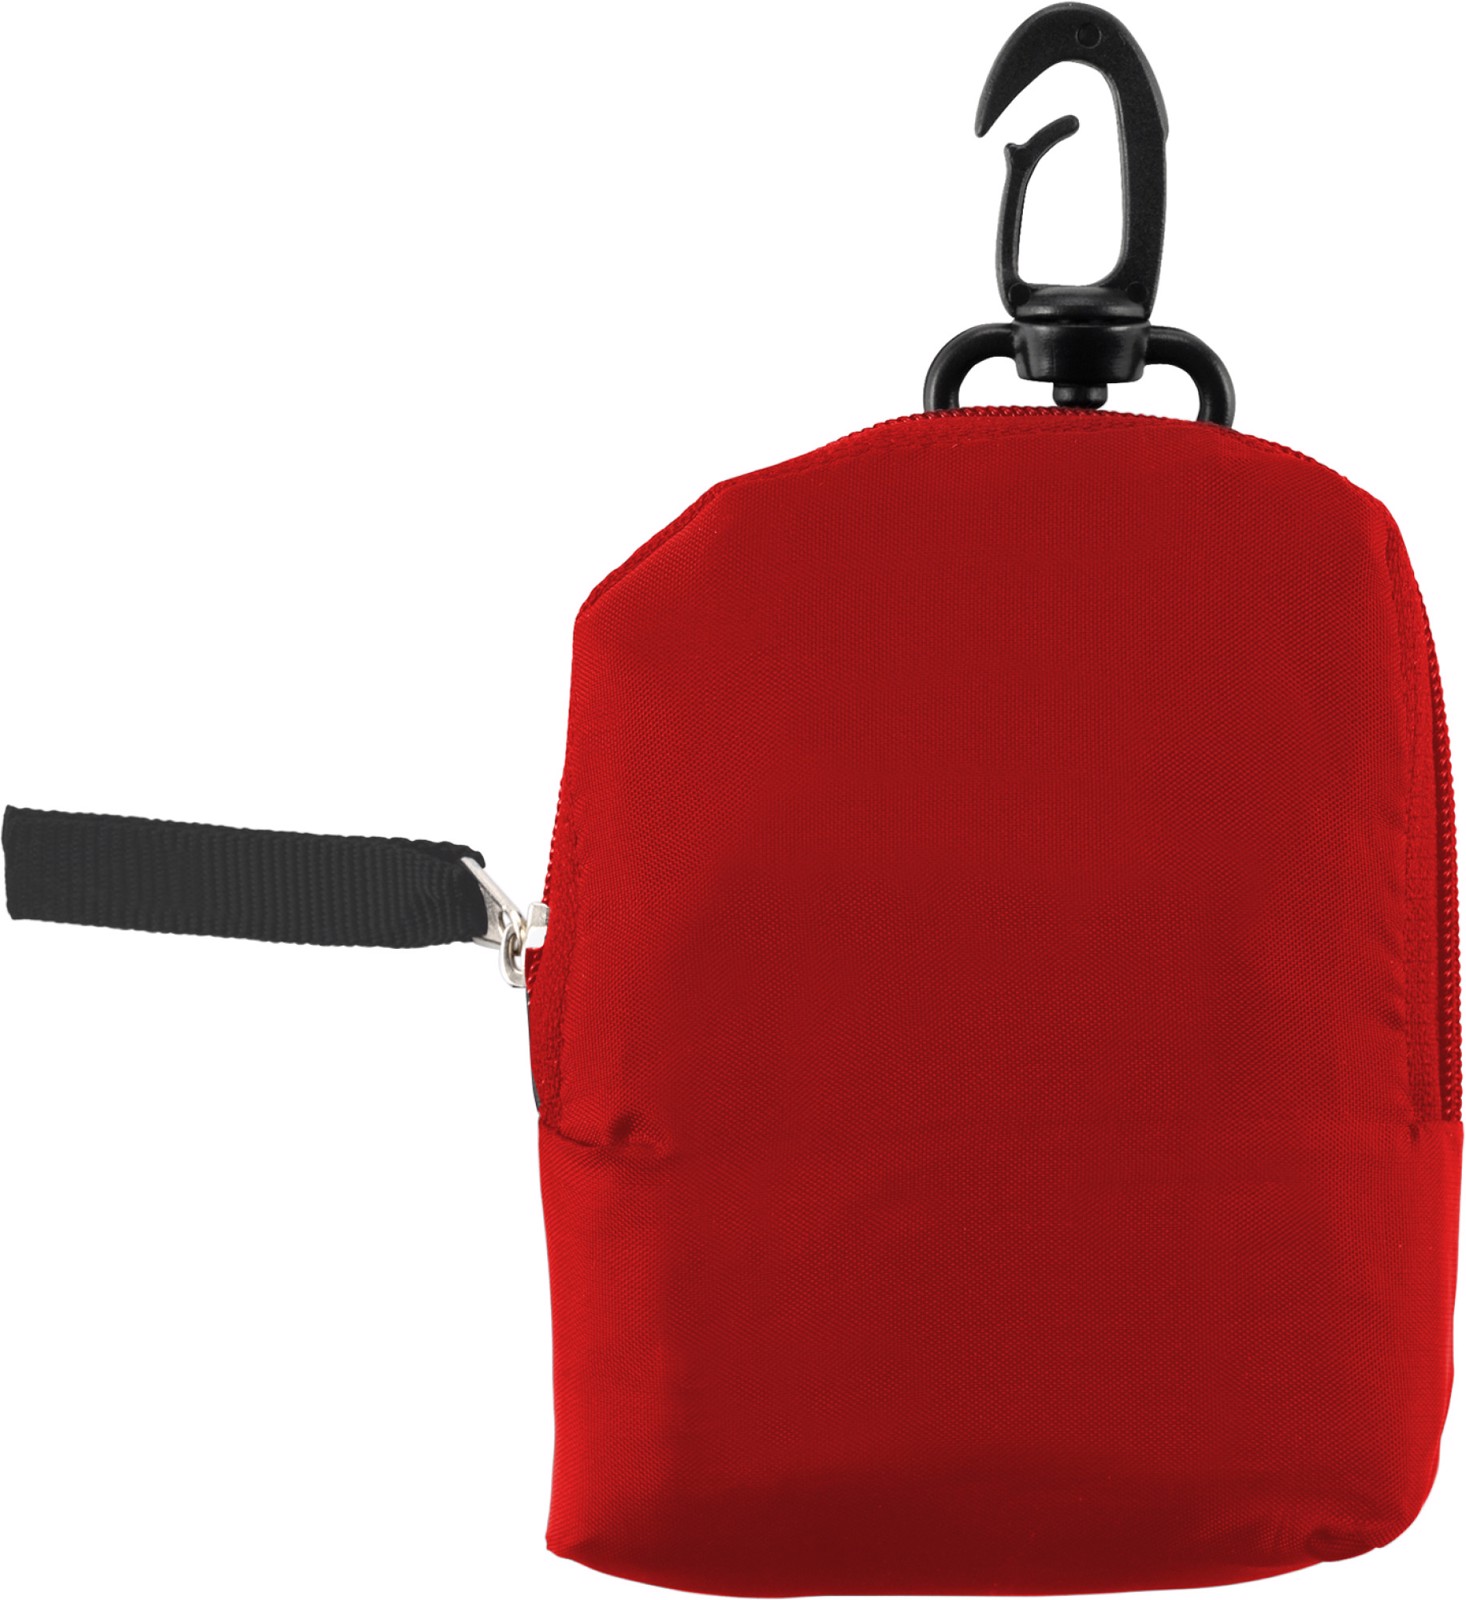 Polyester (190T) shopping bag - Red